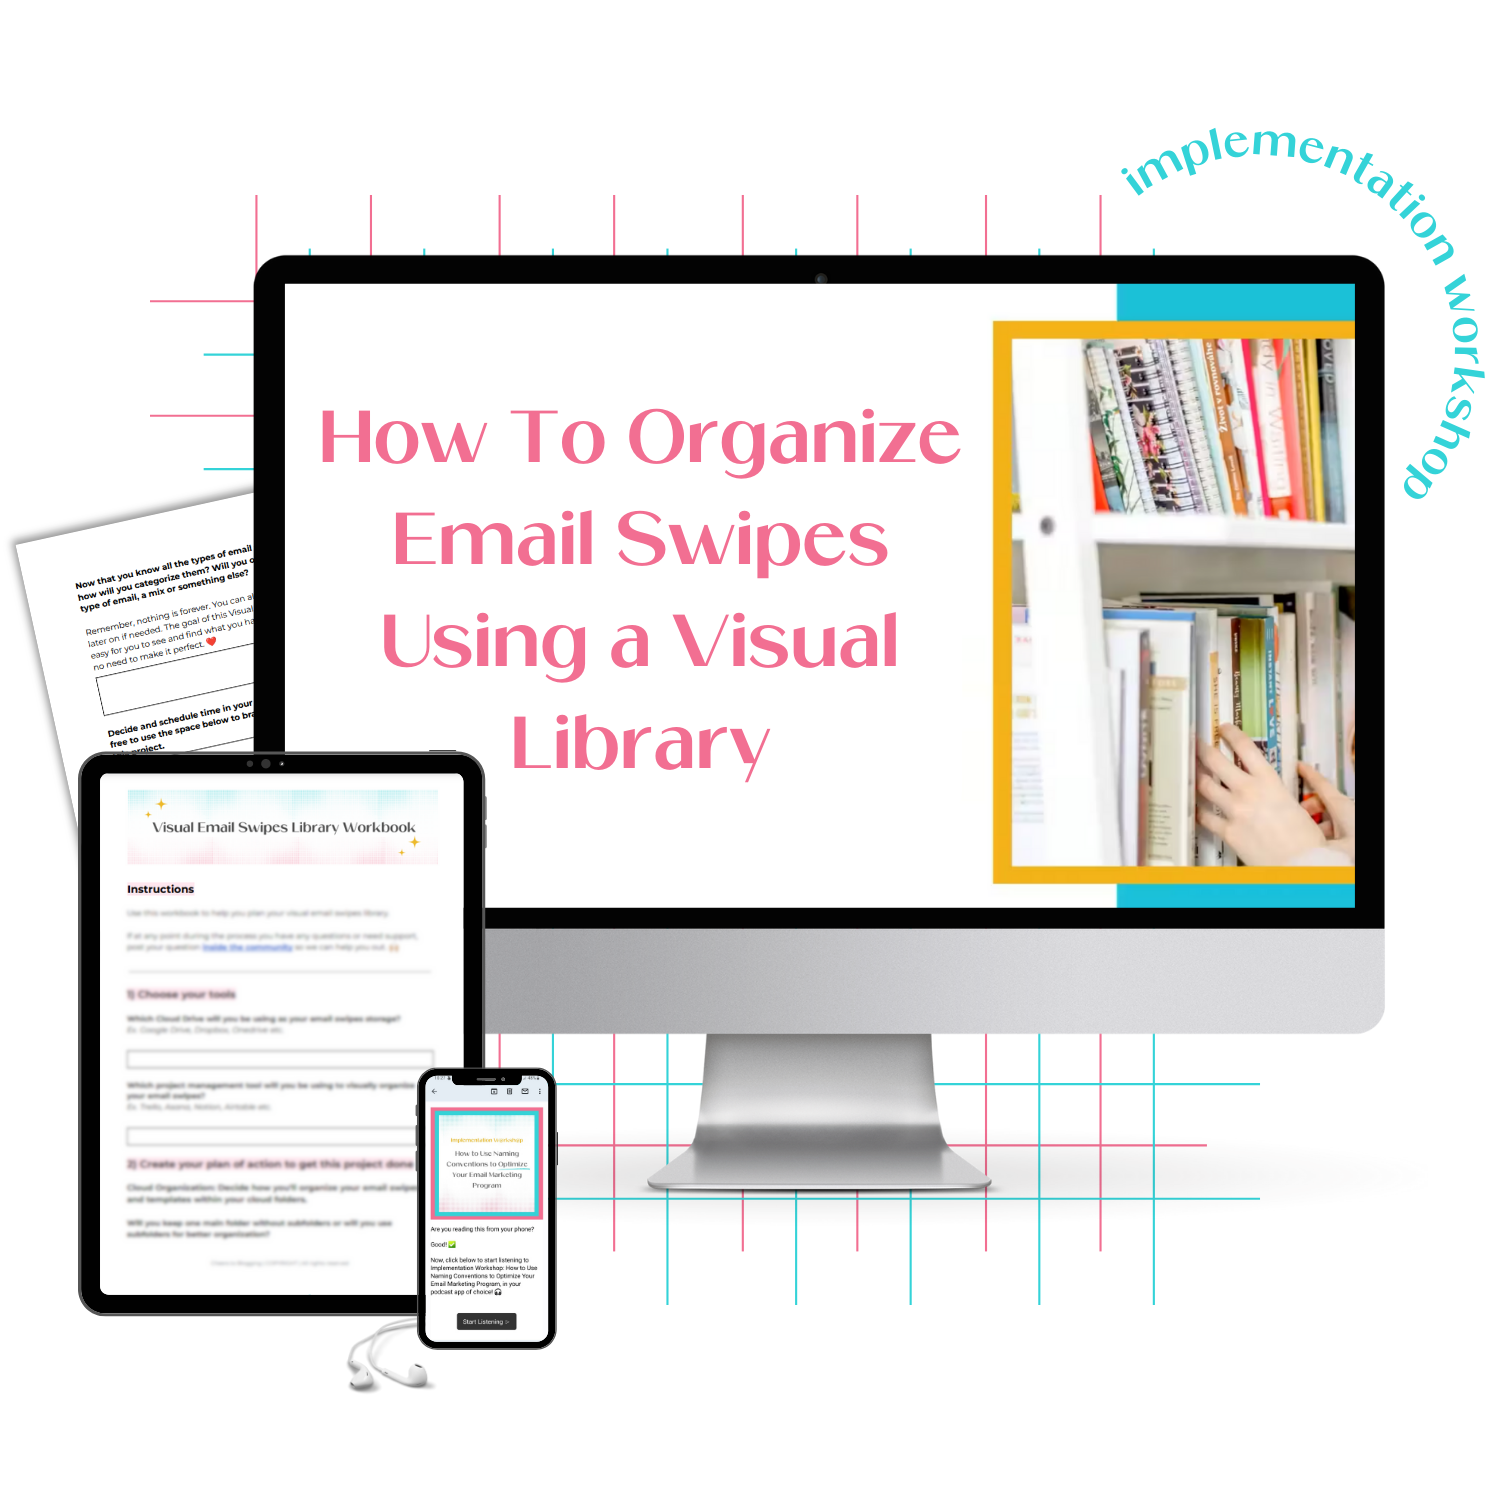 A monitor mockup displaying the Implementation Workshop on How To Organize Email Swipes Using a Visual Library.